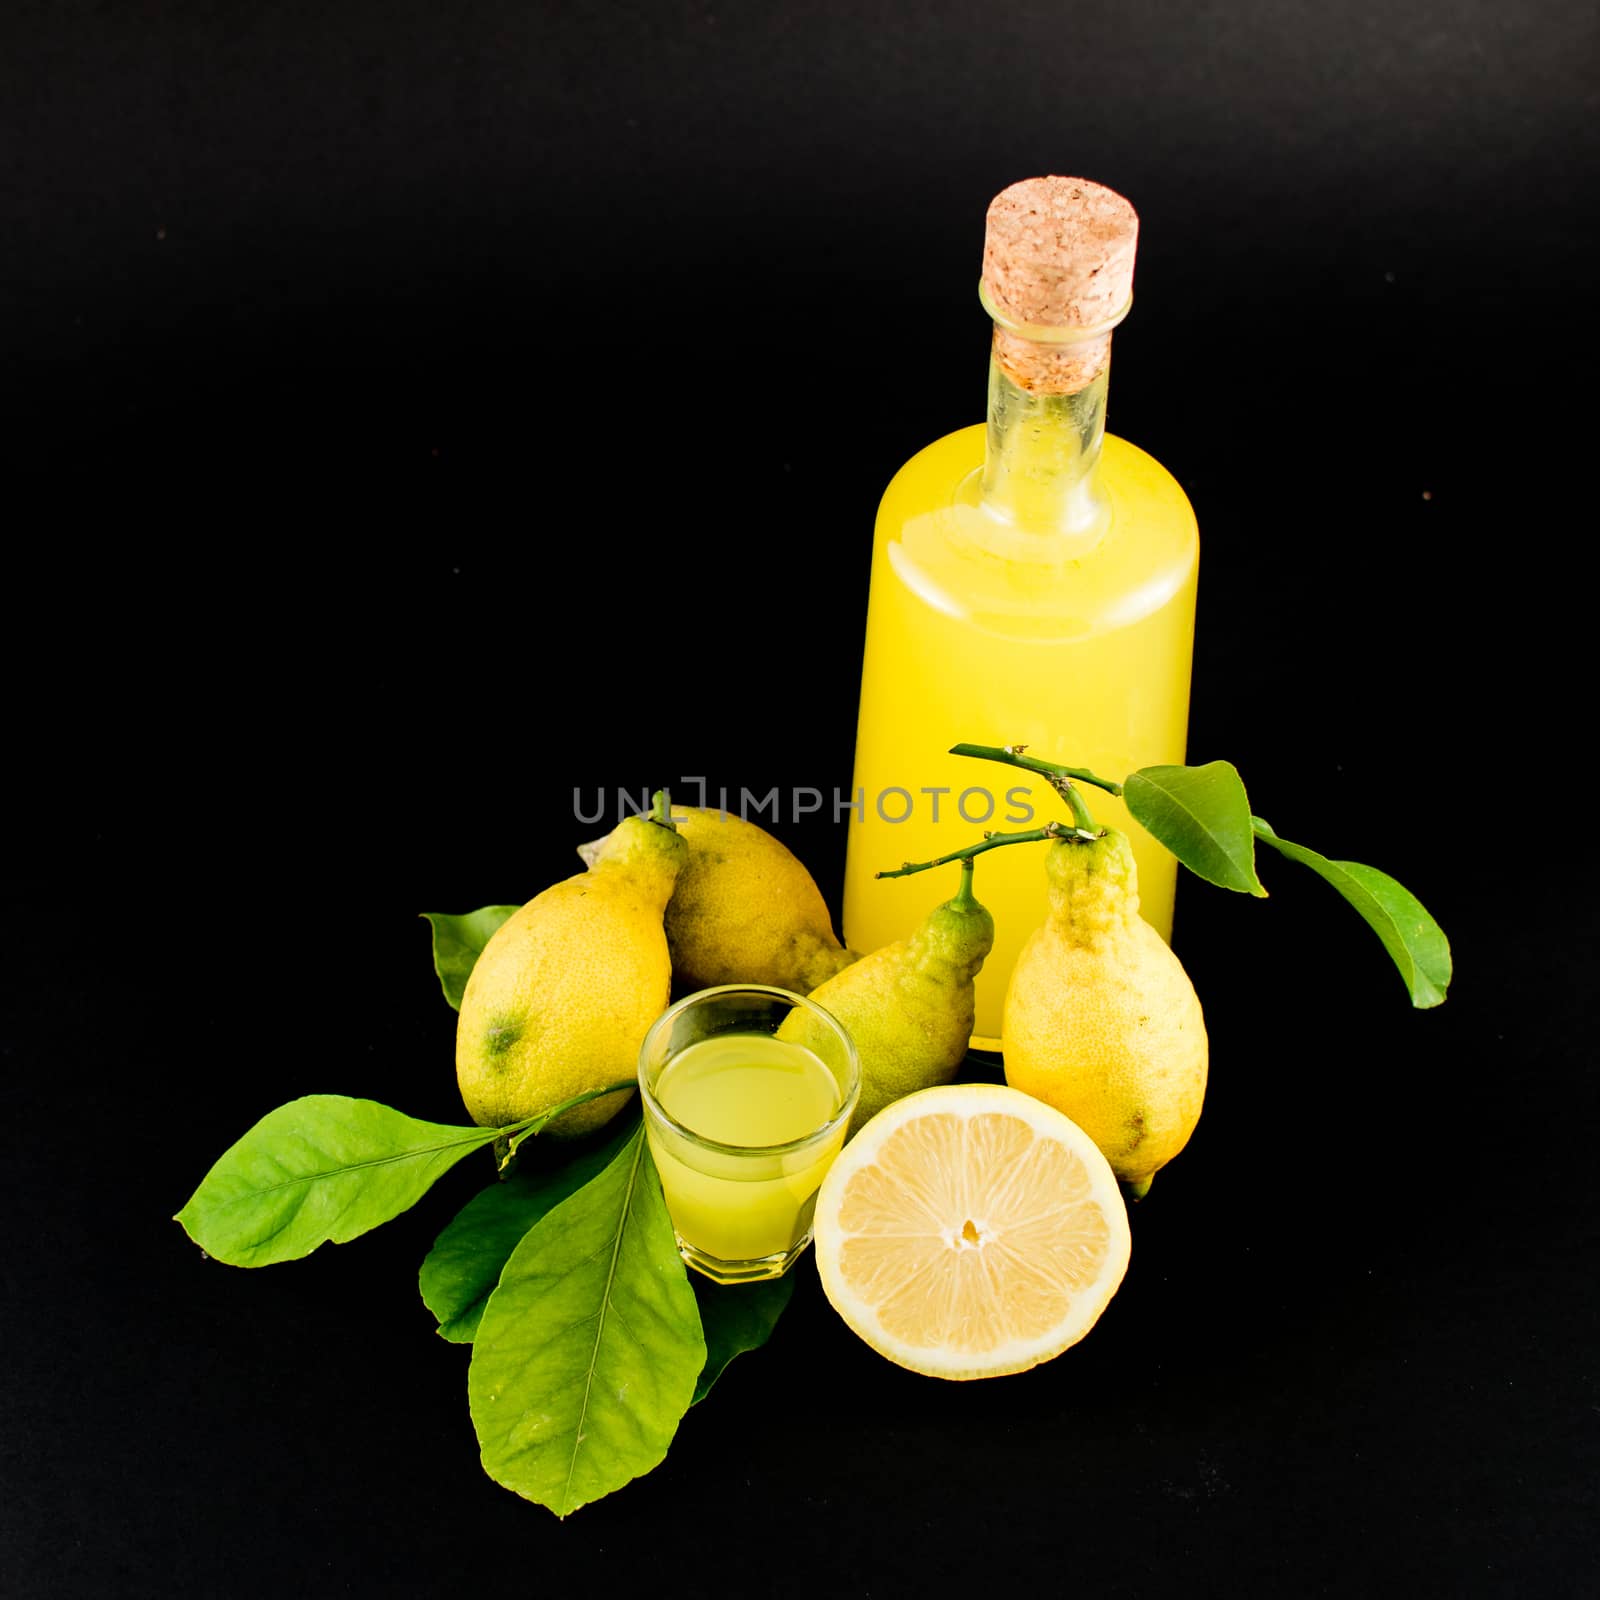 "Limoncello" is the traditional liqueur distilled from the peel of lemons (called sfusato amalfitano) produced in all the Coast of Amalfi until Sorrento. It's a natural liqueur, with special properties, a unique taste, perfumed, obtained by an ancient and simple recipe. It's a compound simple to realize, without added coloring, stabilizing or conserving agents. The simple way and the cure to produce it emphasize the originality and the purity, just like much time ago.